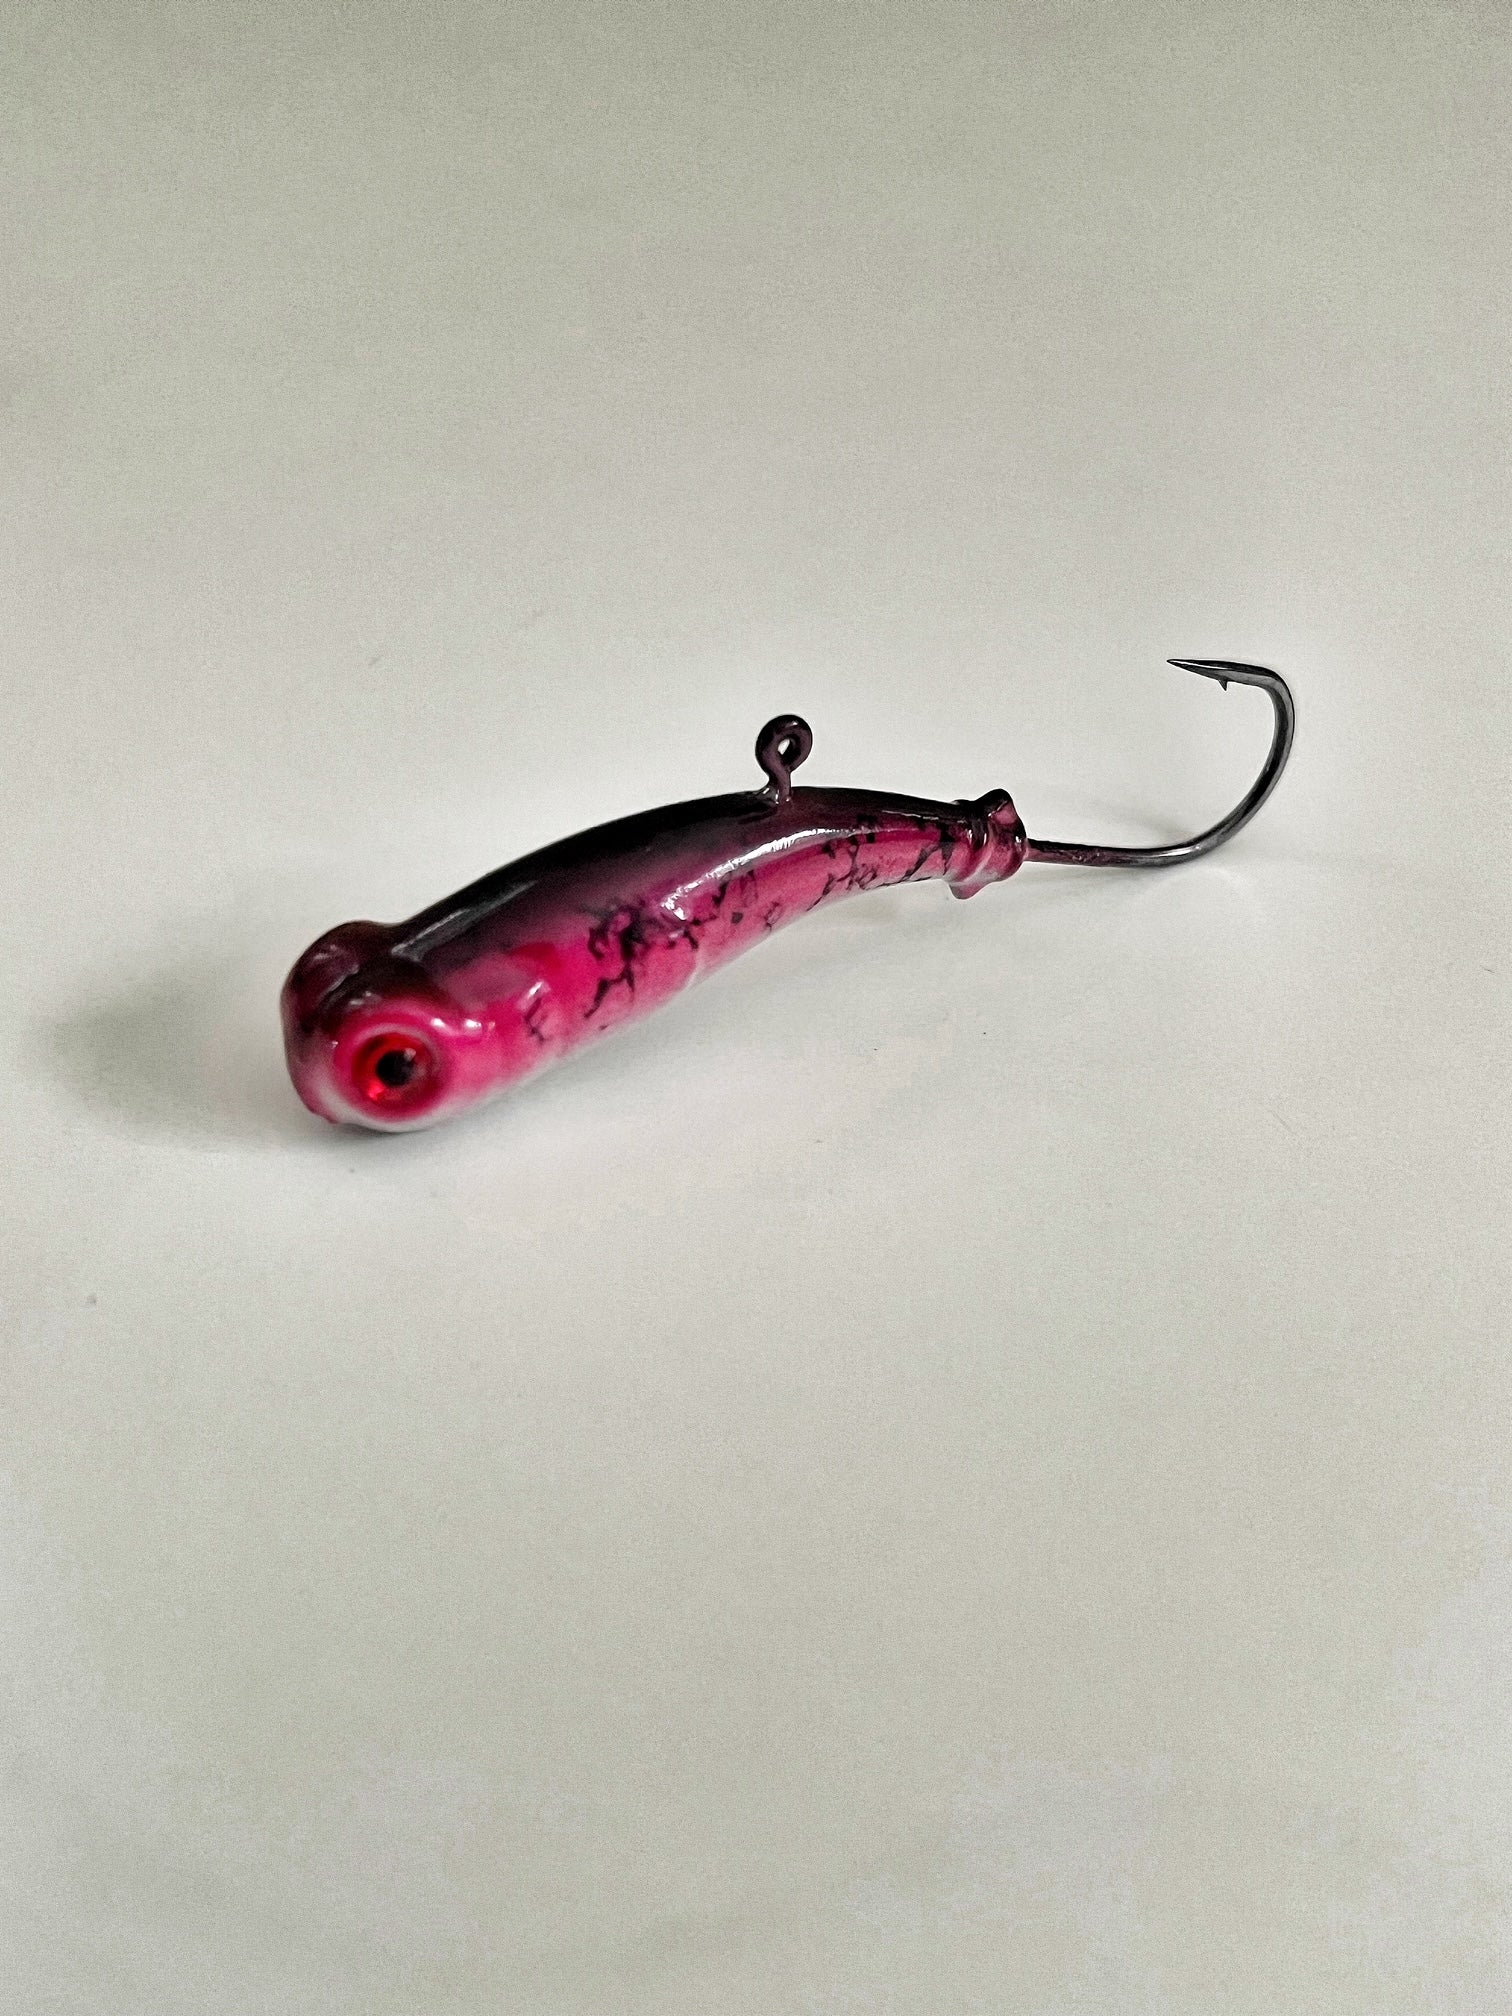 The Boothy Bomber (Special Menace Jig) – Trifecta Tackle